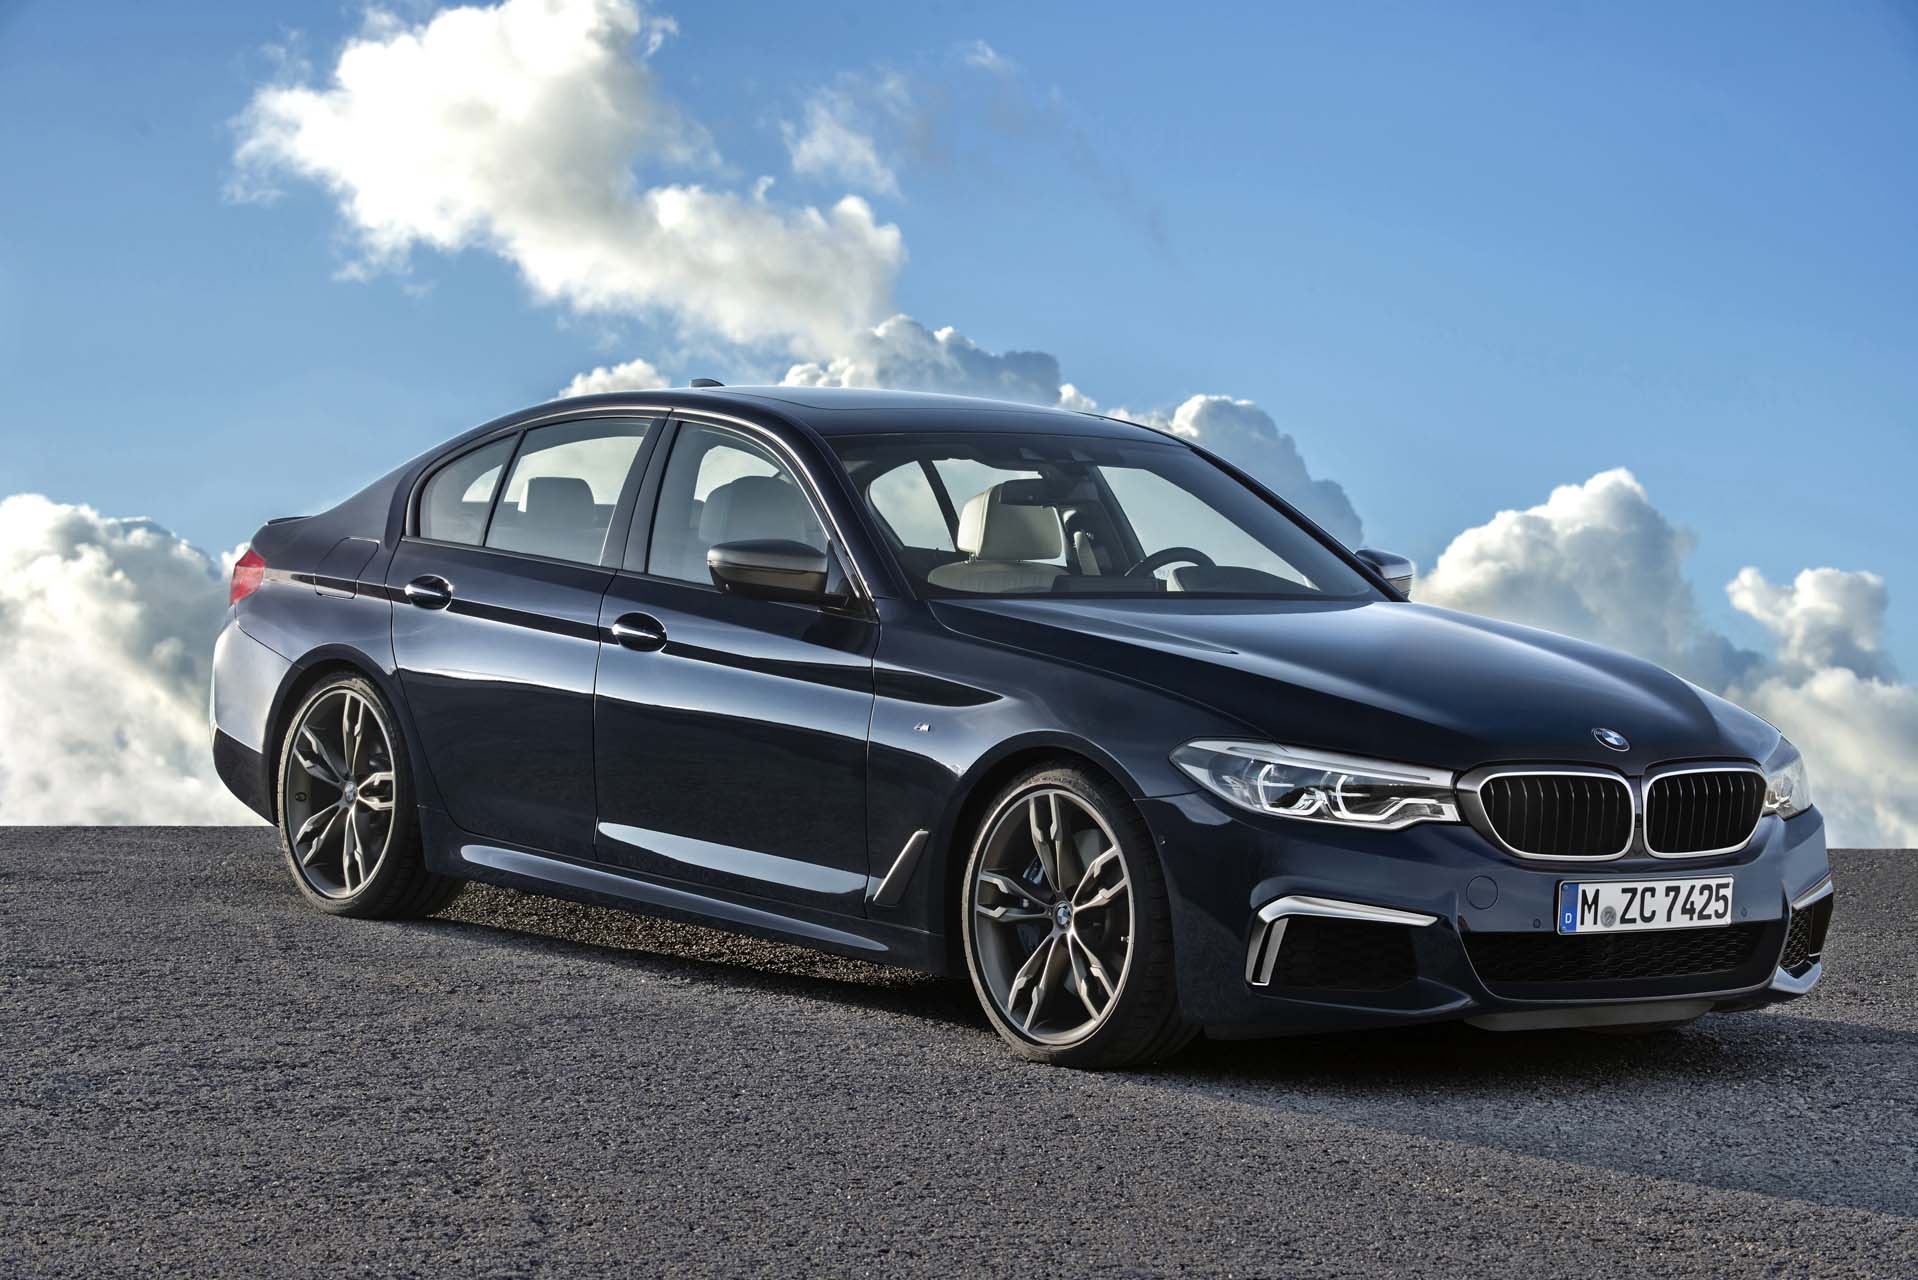 The spark (less) is back! Diesel-powered 2018 BMW 540d on sale next month